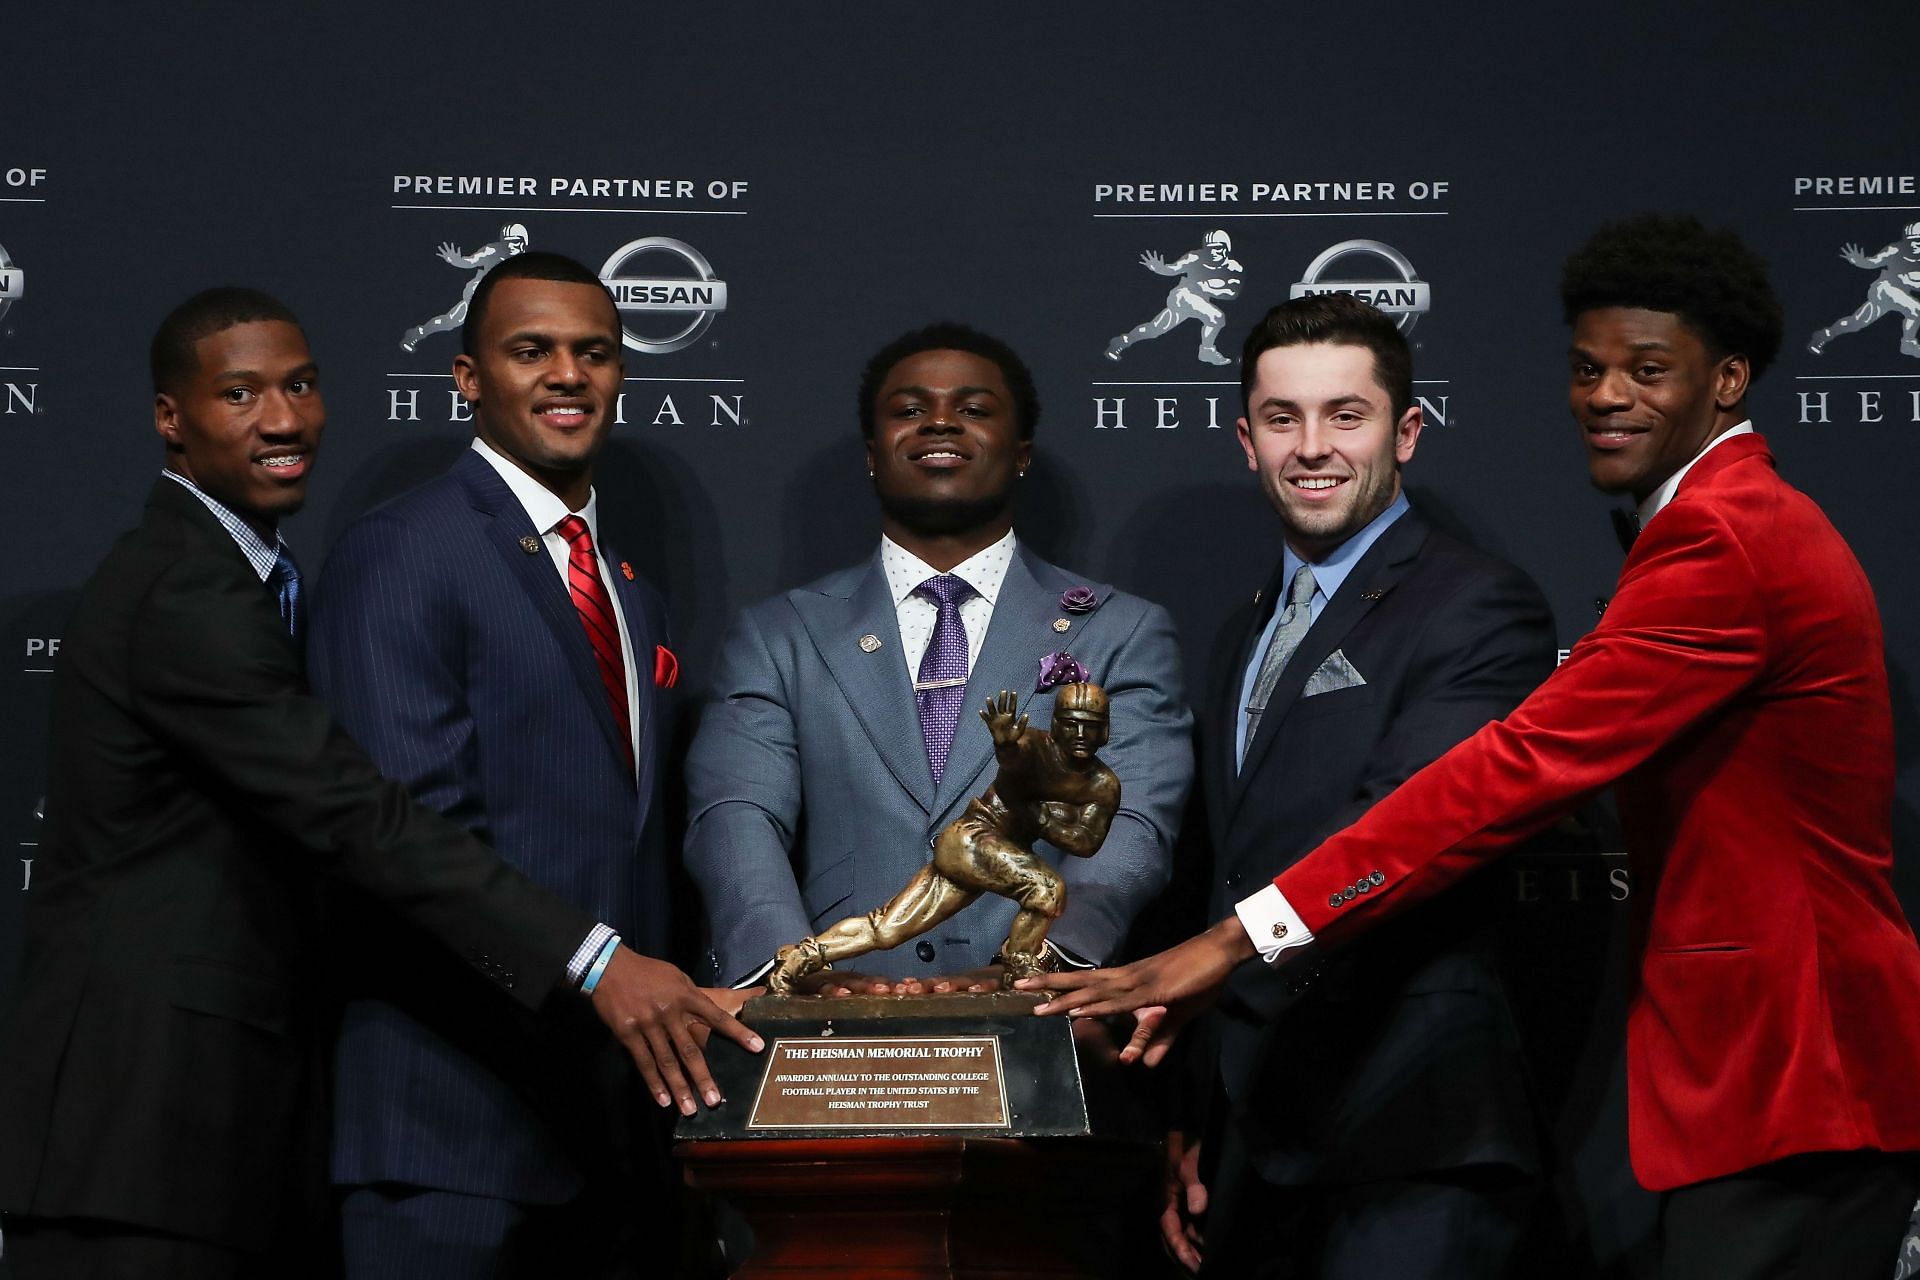 2016 Heisman Ceremony with Deshaun Watson (second from left) and Baker Mayfield (second from right)